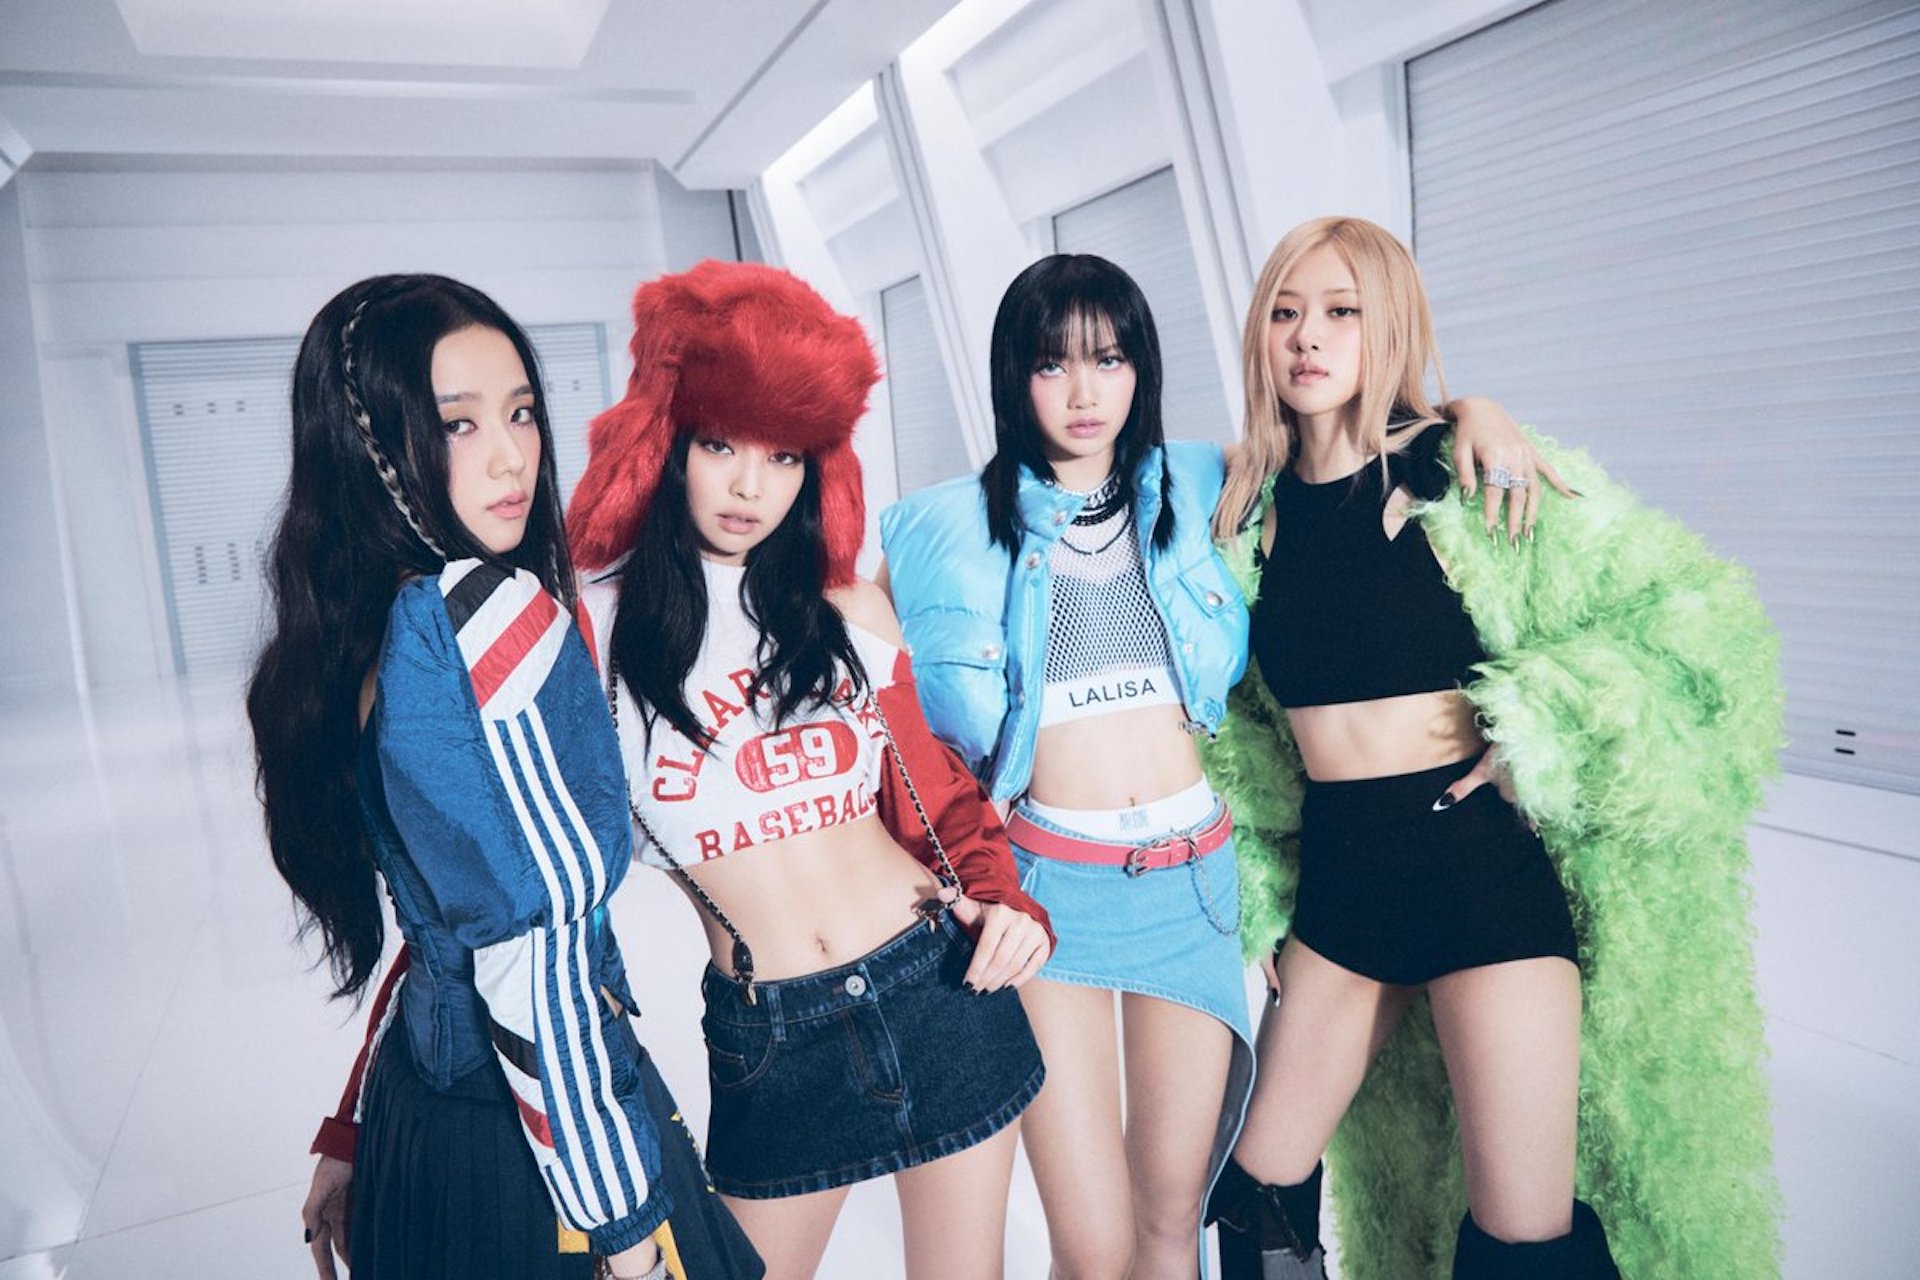 BLACKPINK has now shut us down. After being M.I.A for two excruciatingly long years, the iconic YG girl group returned stronger than ever in their second full-length album, 'BORN PINK.'.